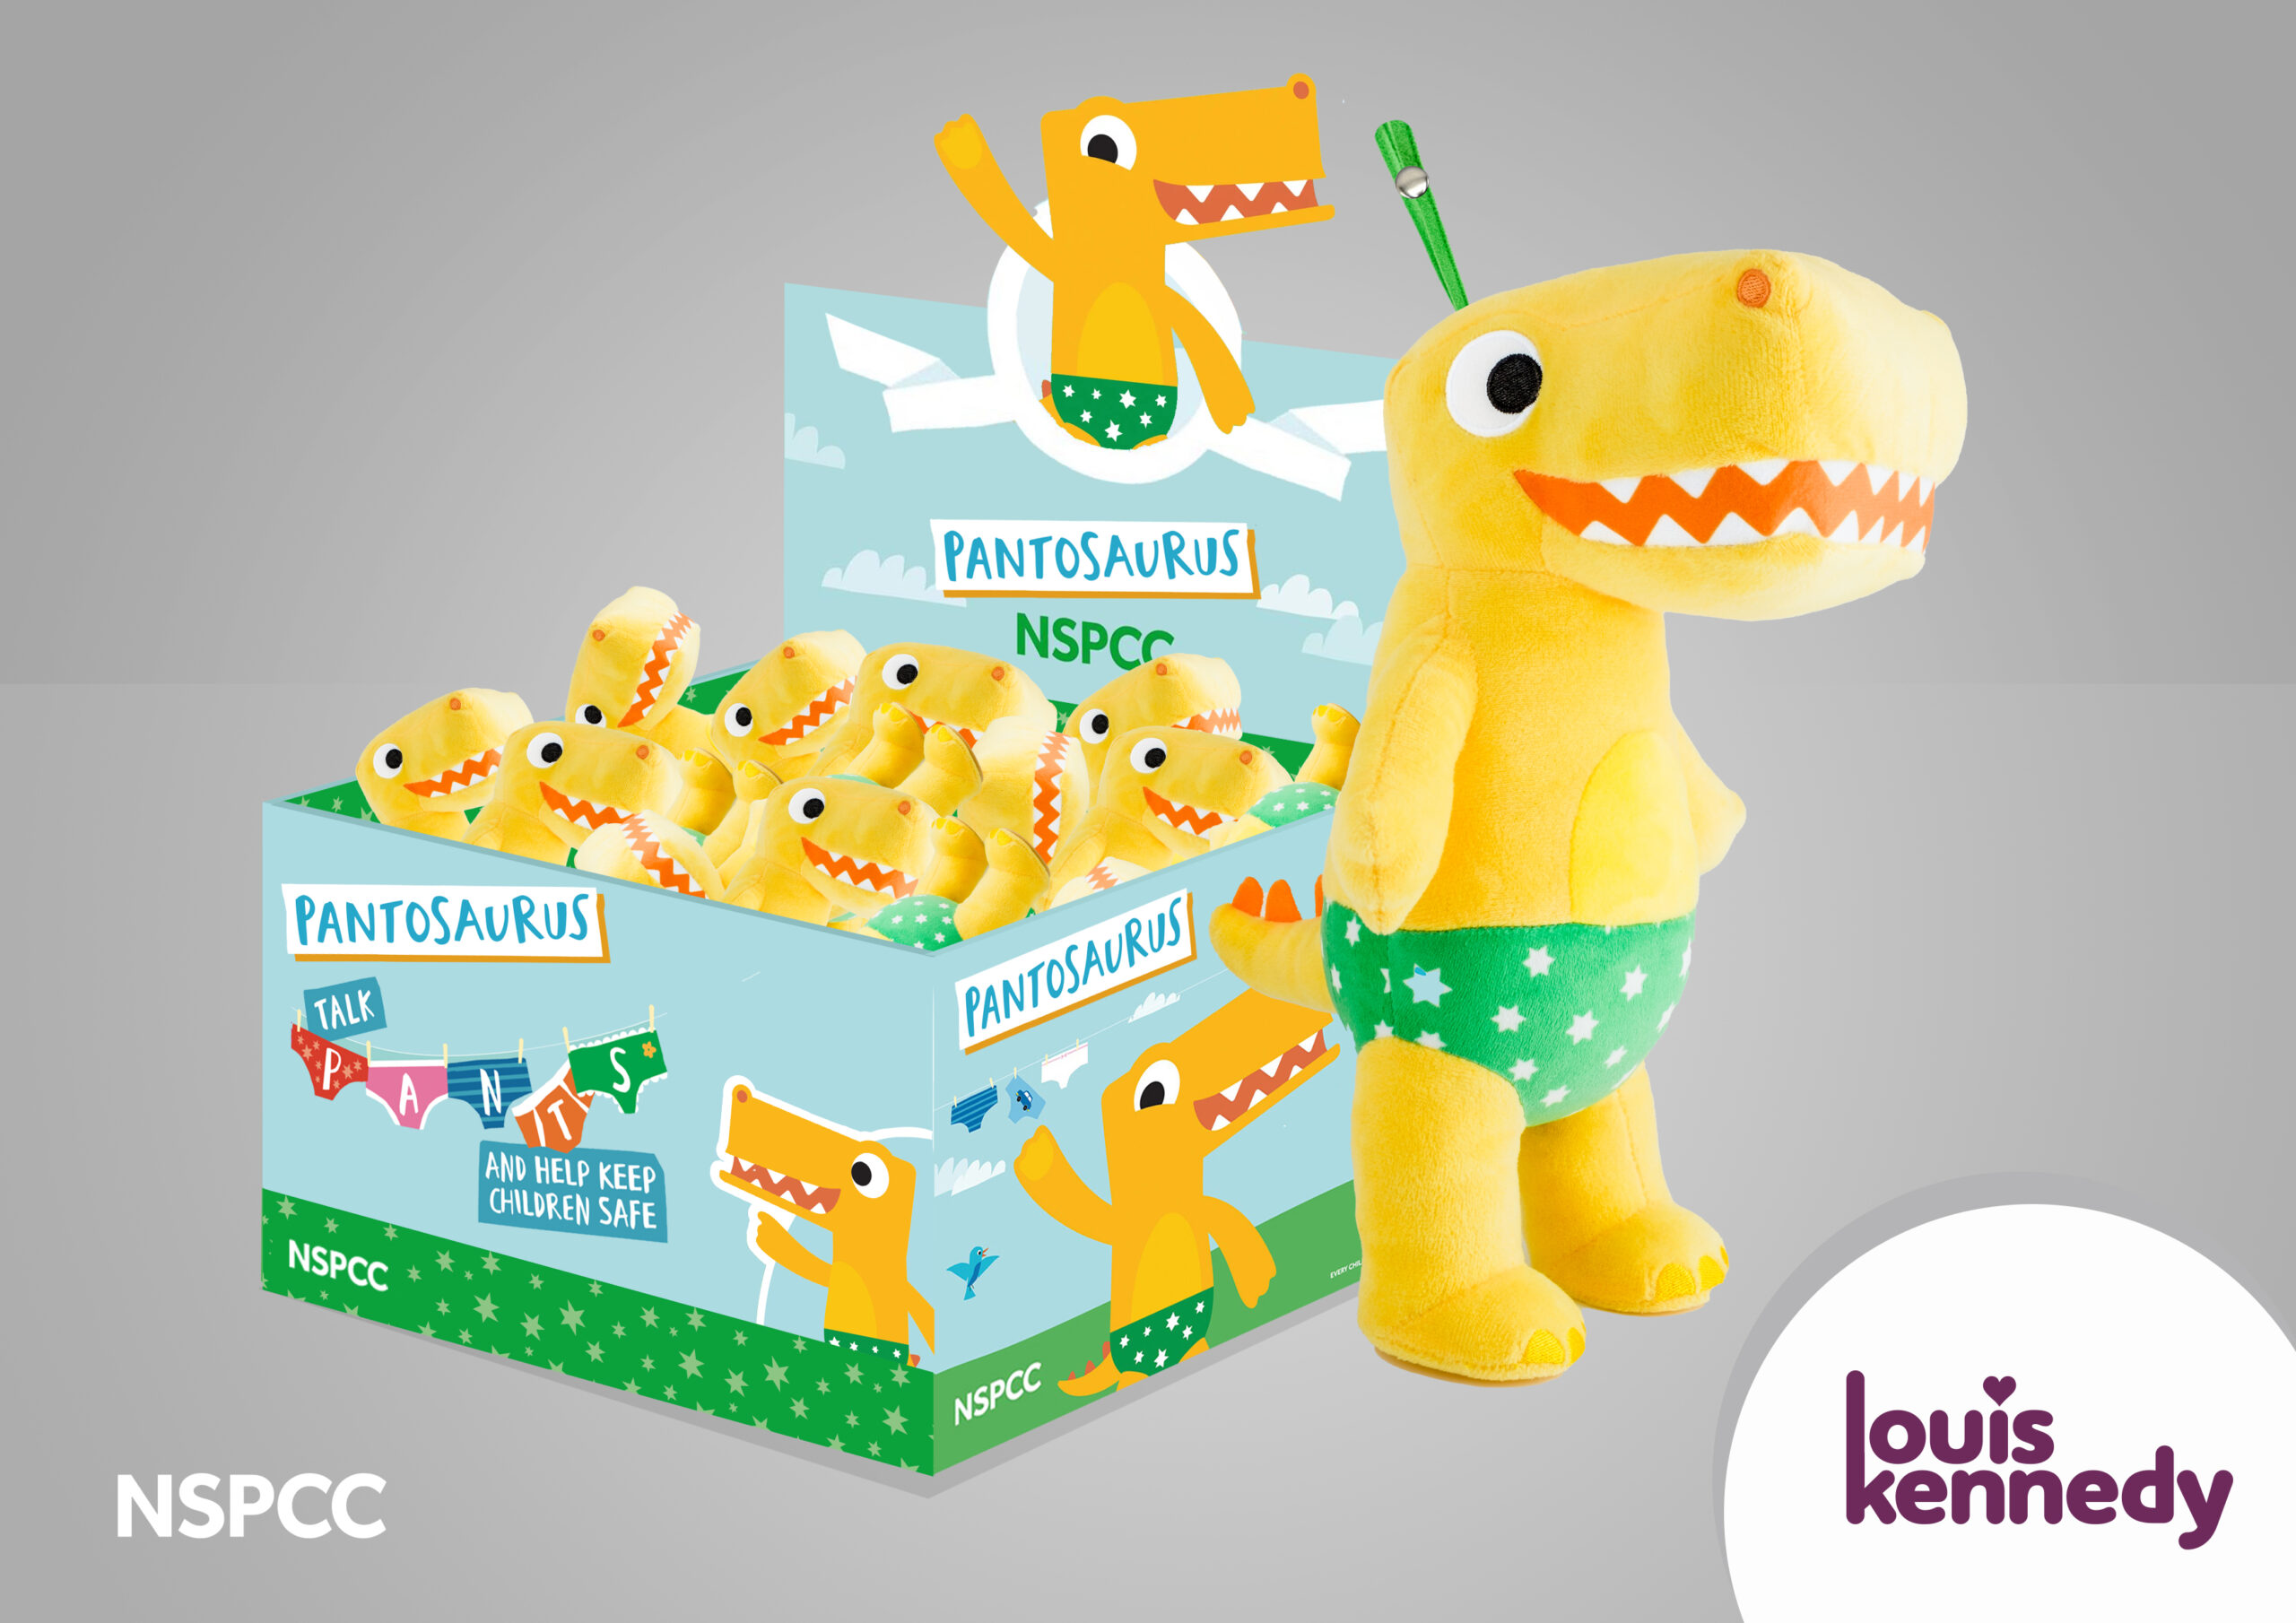 Louis Kennedy partners with the NSPCC for promotional plush